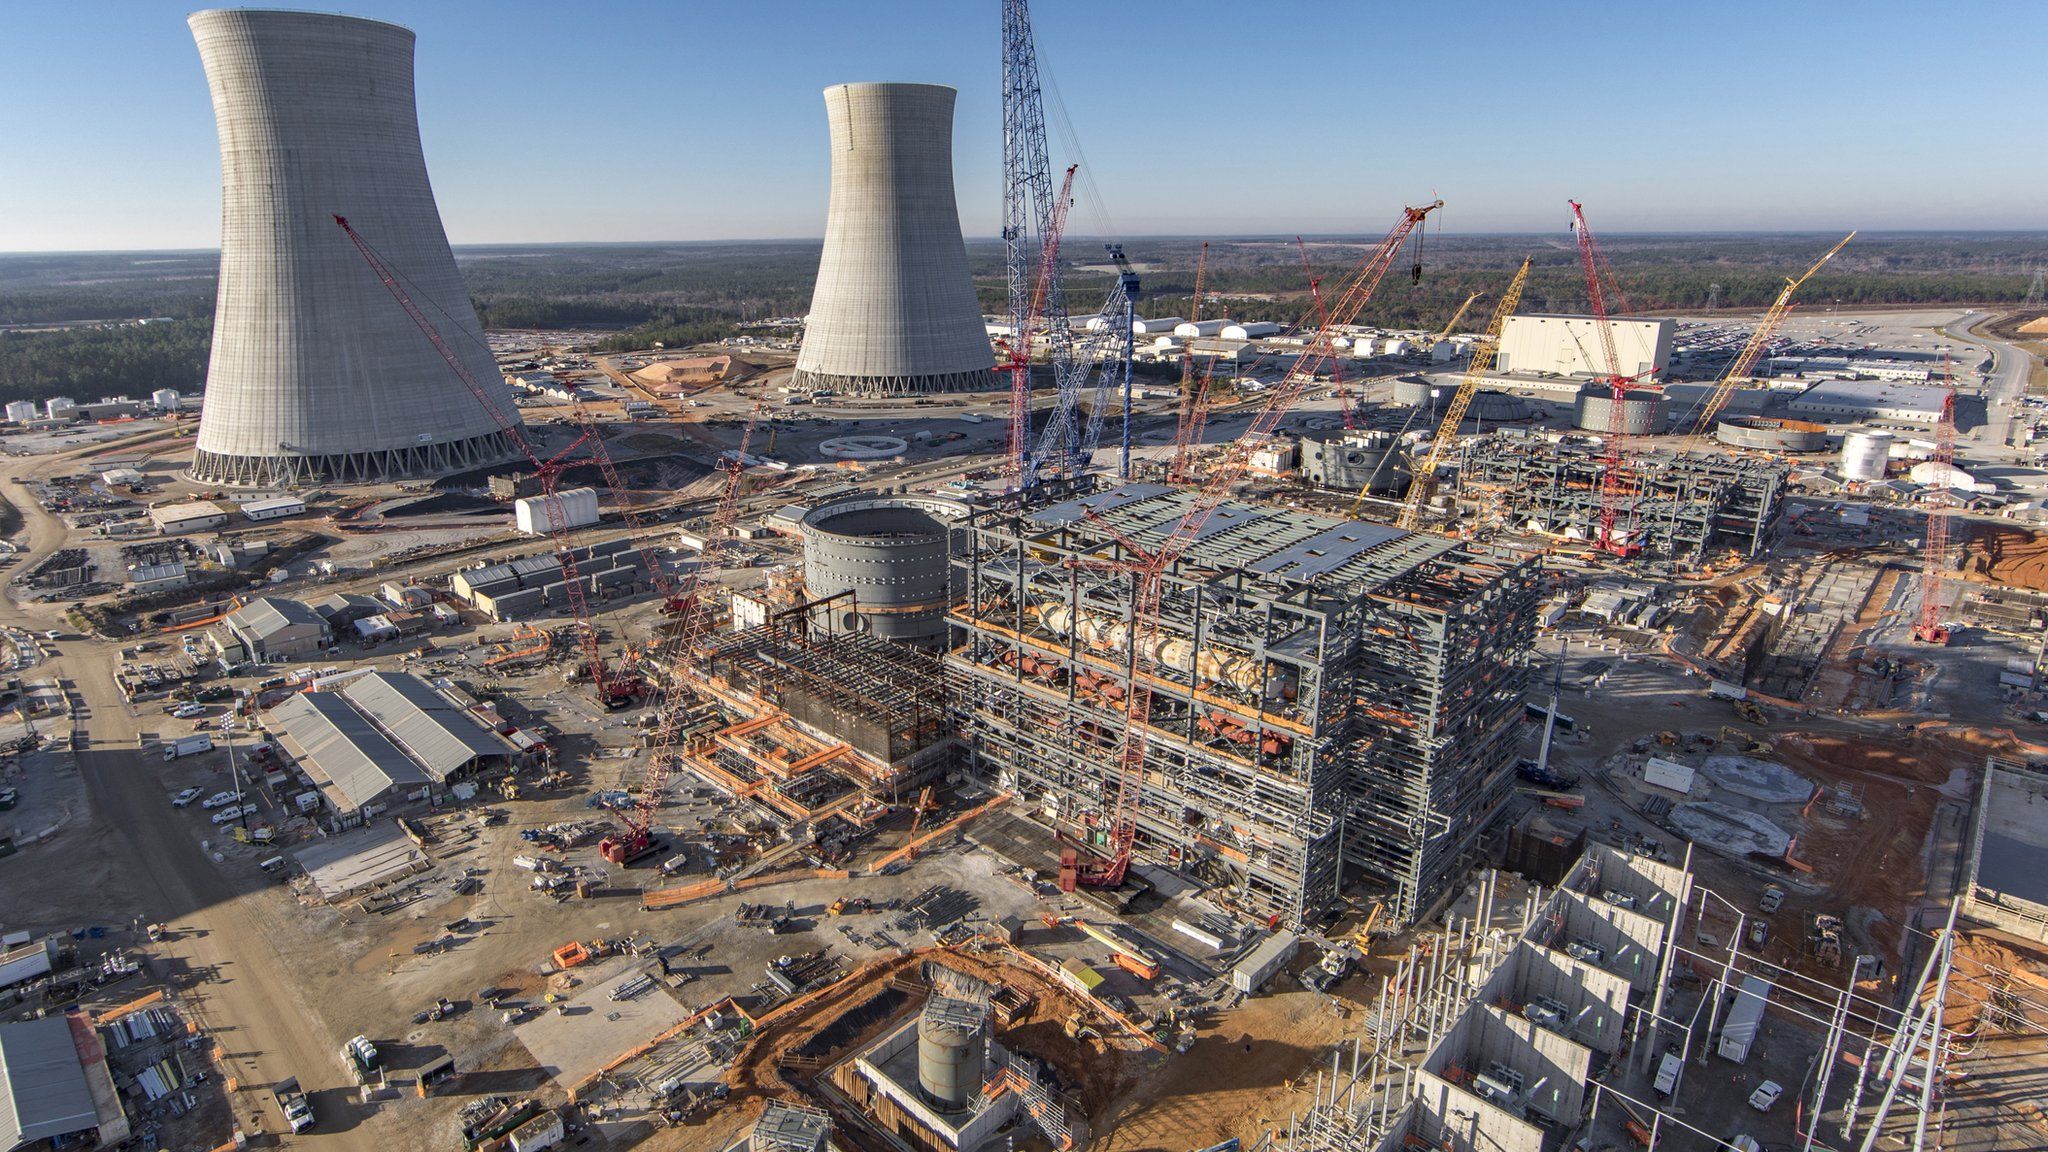 Vogtle nuclear power site in Georgia